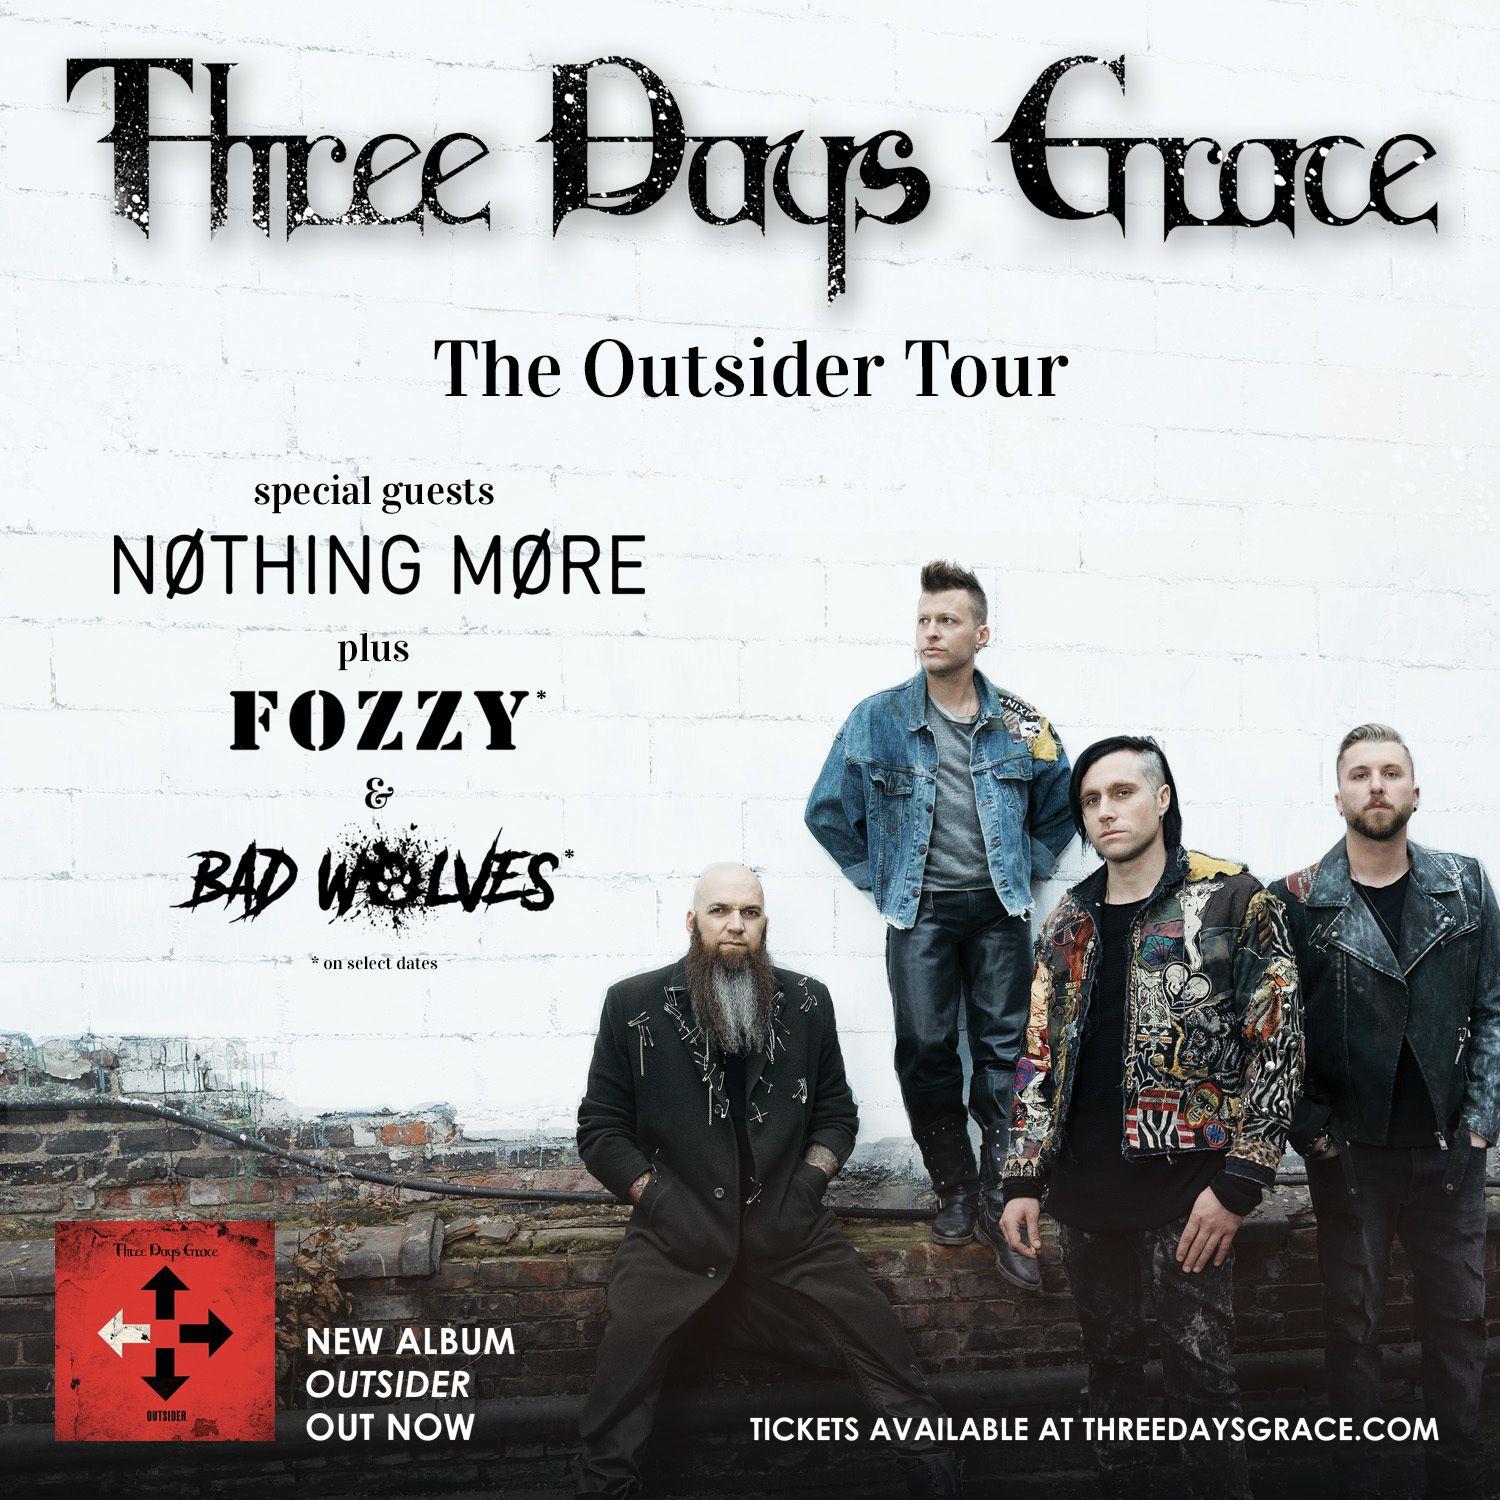 THE OUTSIDER TOUR IN CANADA ANNOUNCED Days Grace